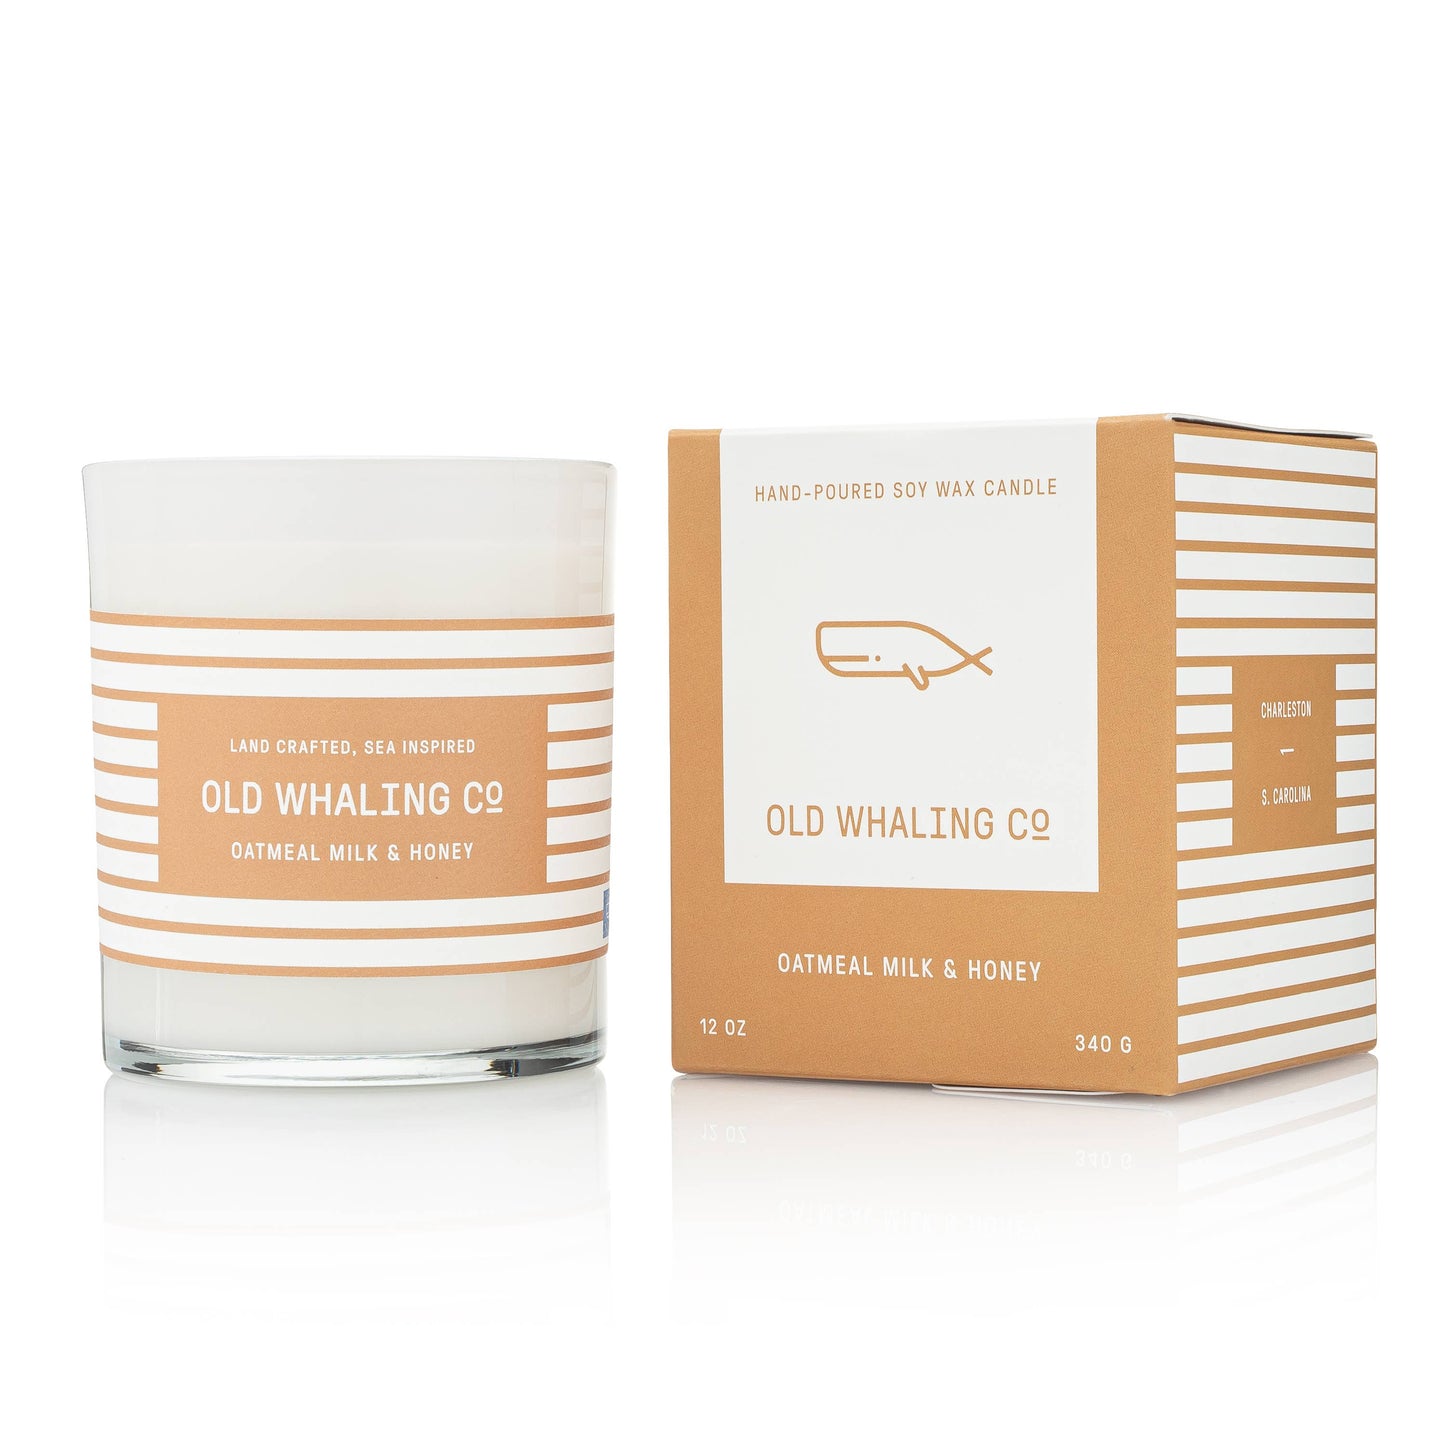 Old Whaling Company - Oatmeal Milk & Honey Candle